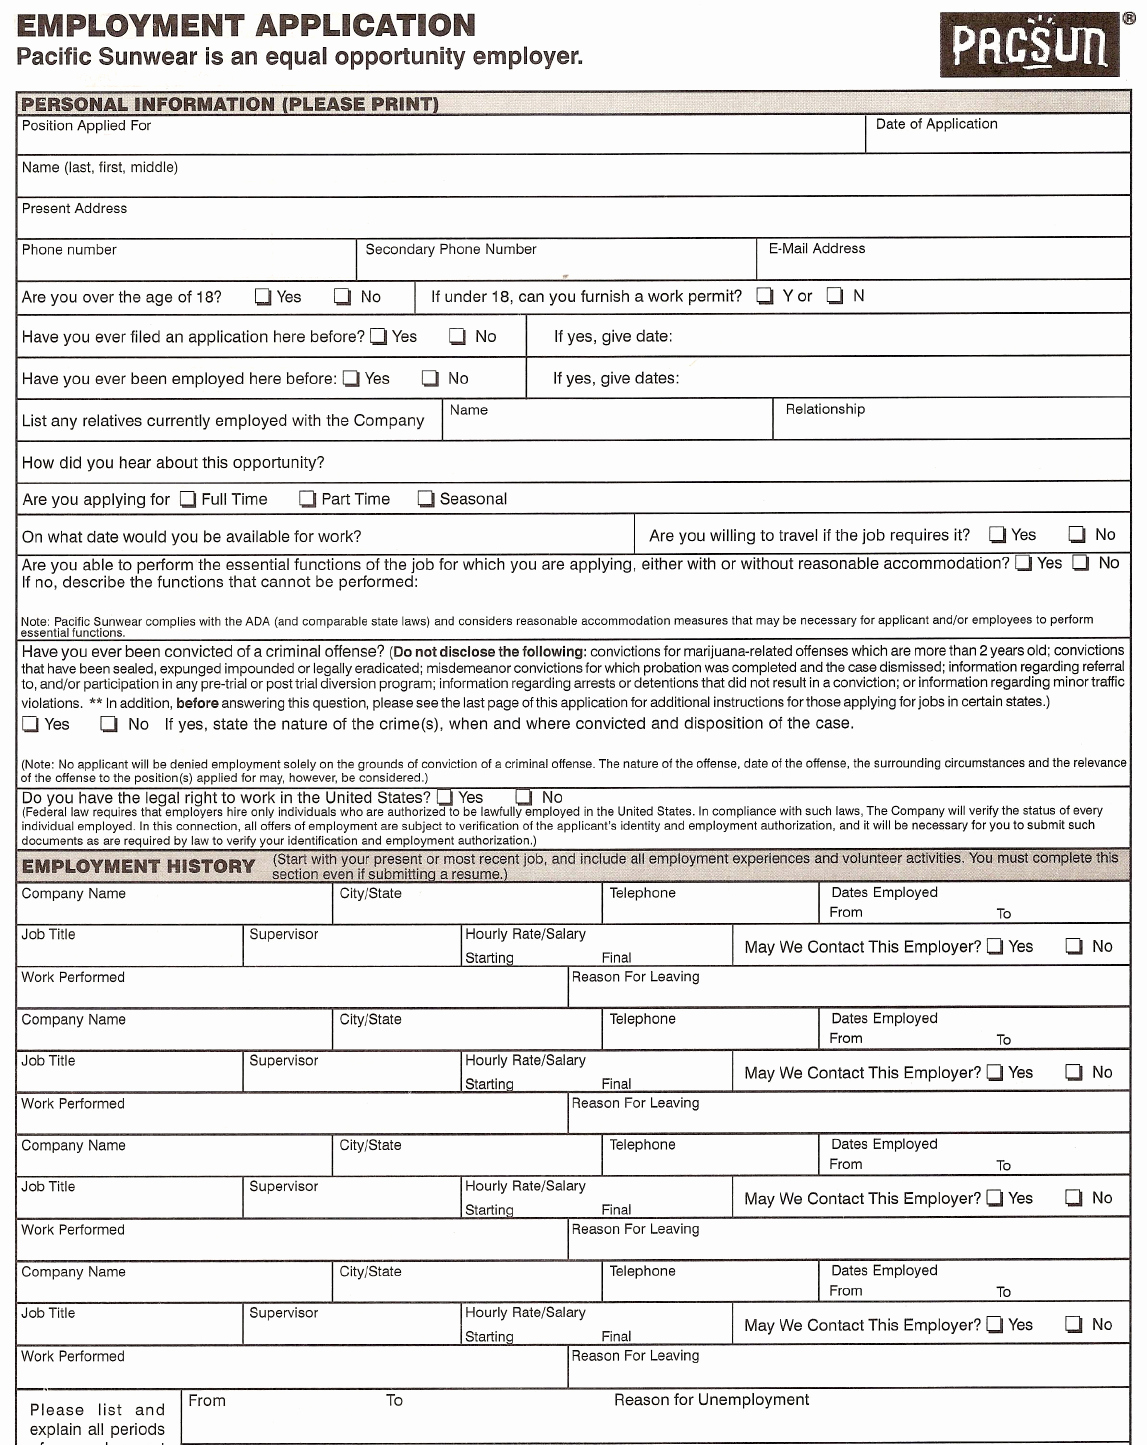 Retail Application form Best Of Pacsun Printable Job